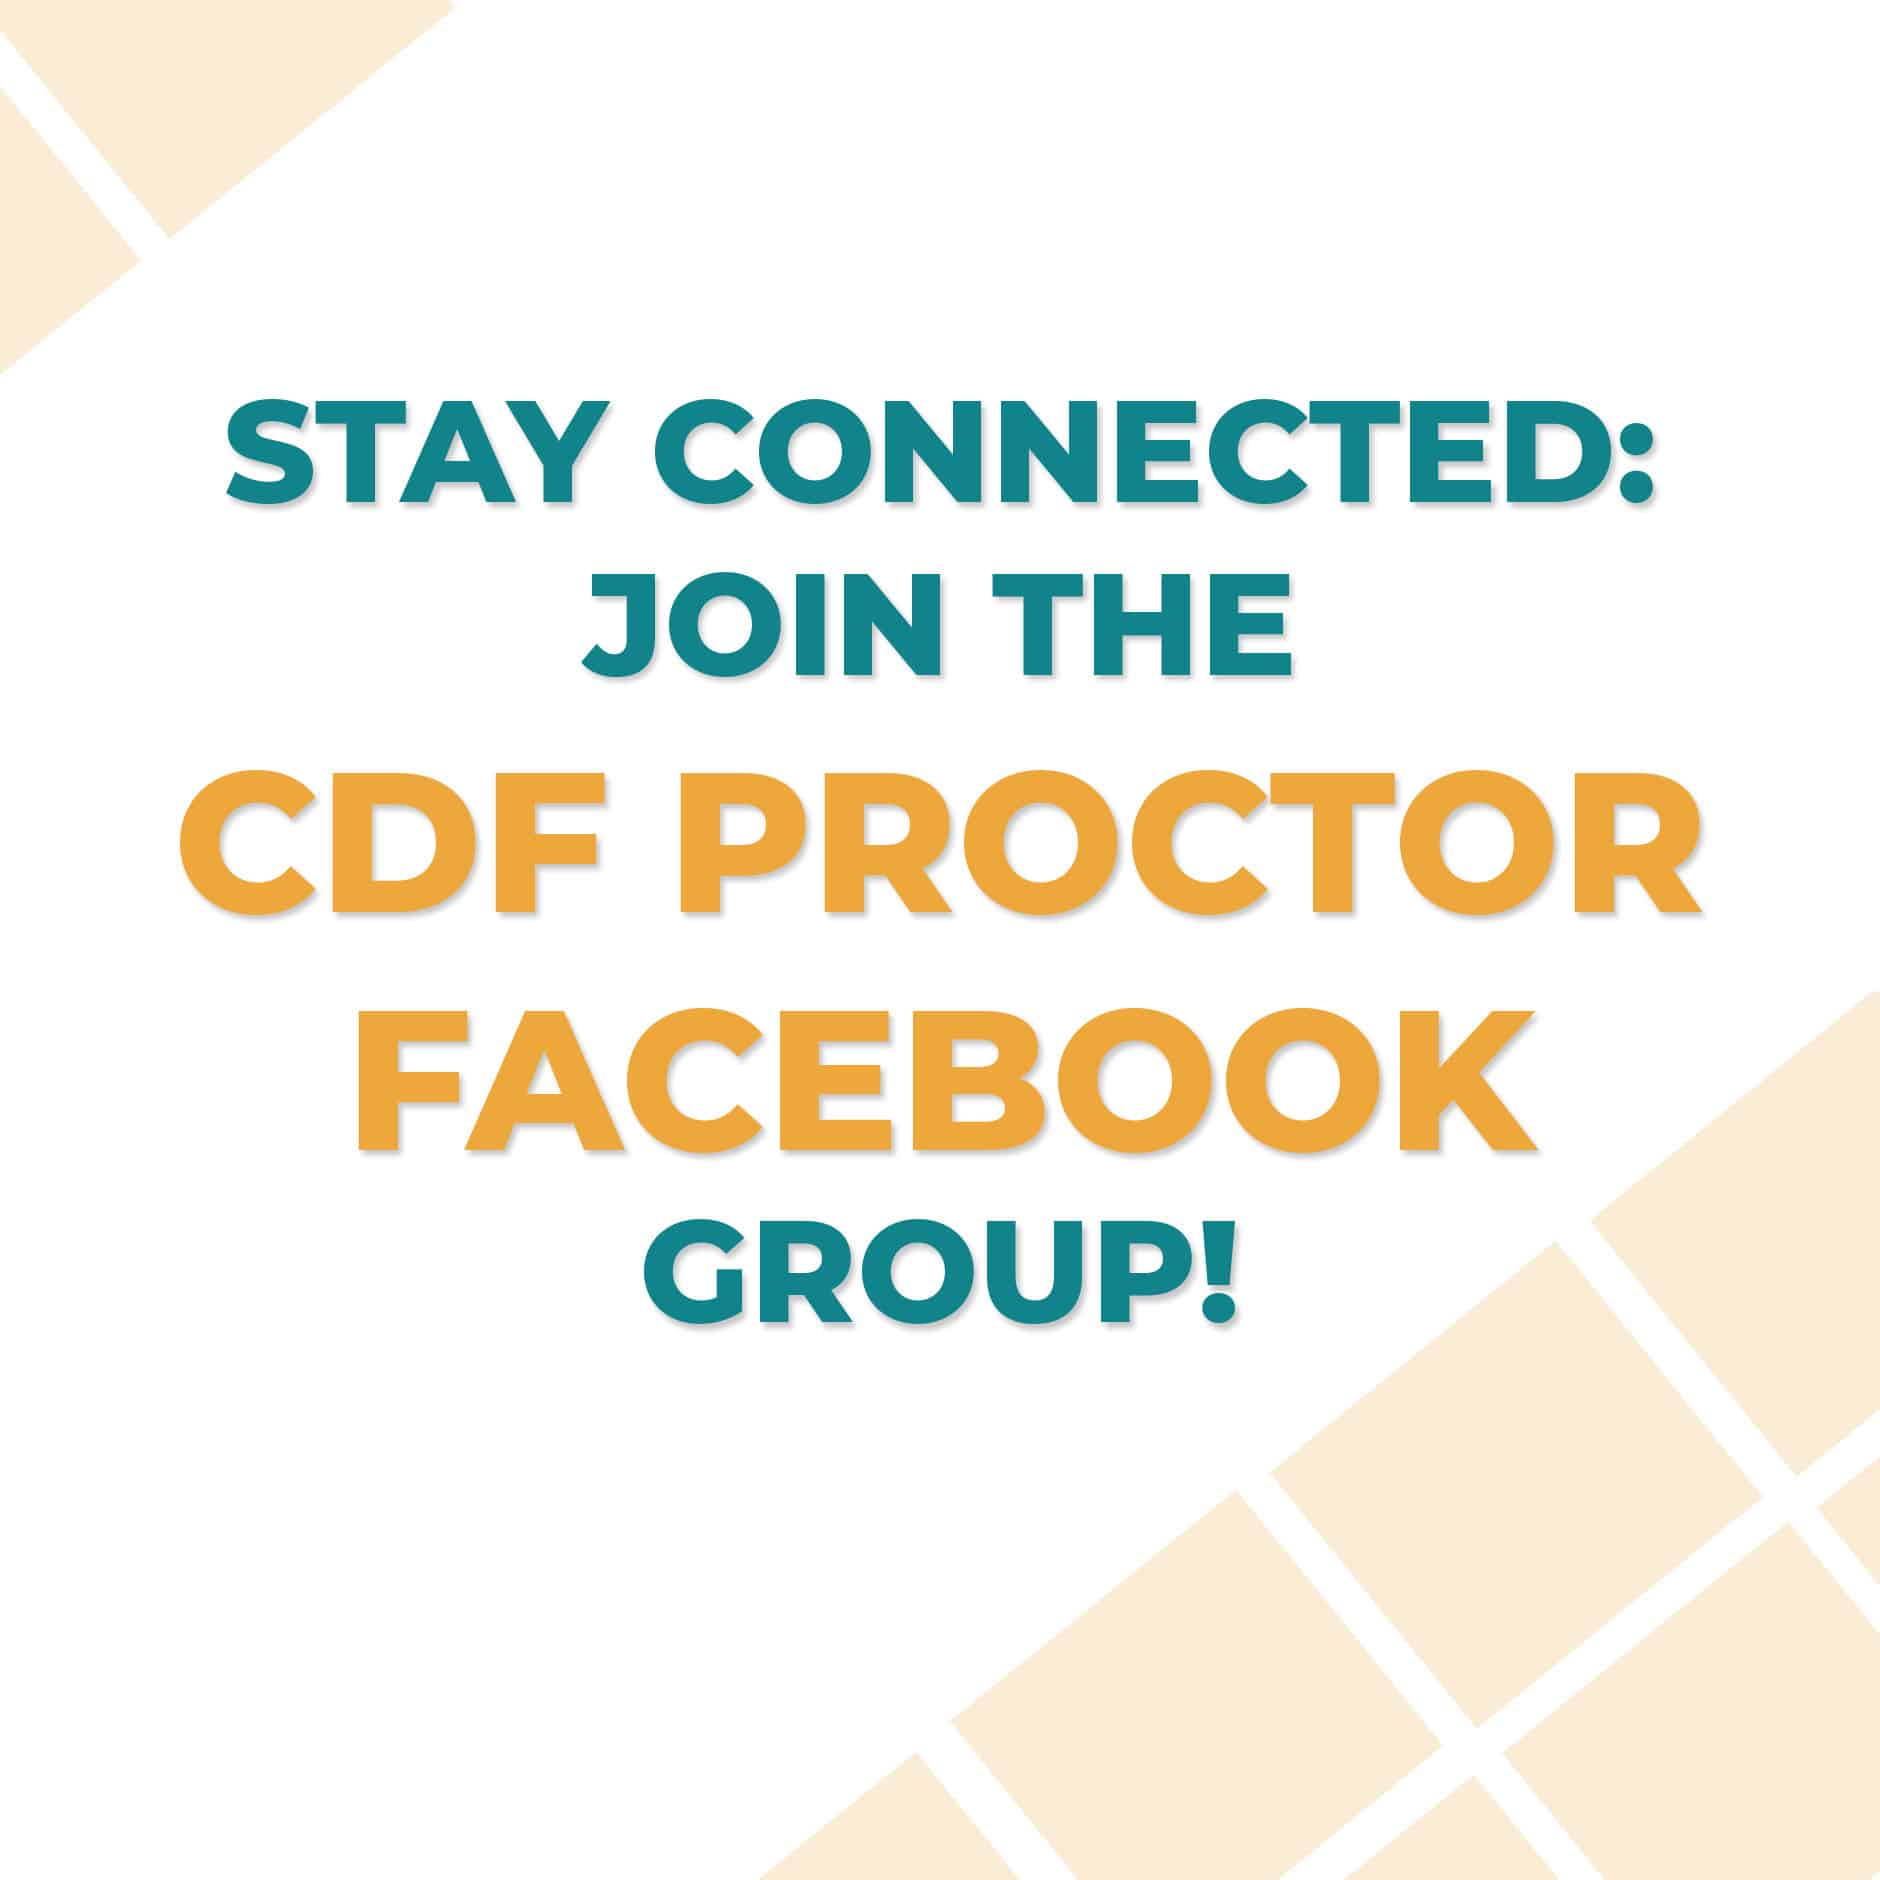 Join the CDF Proctor Facebook group!